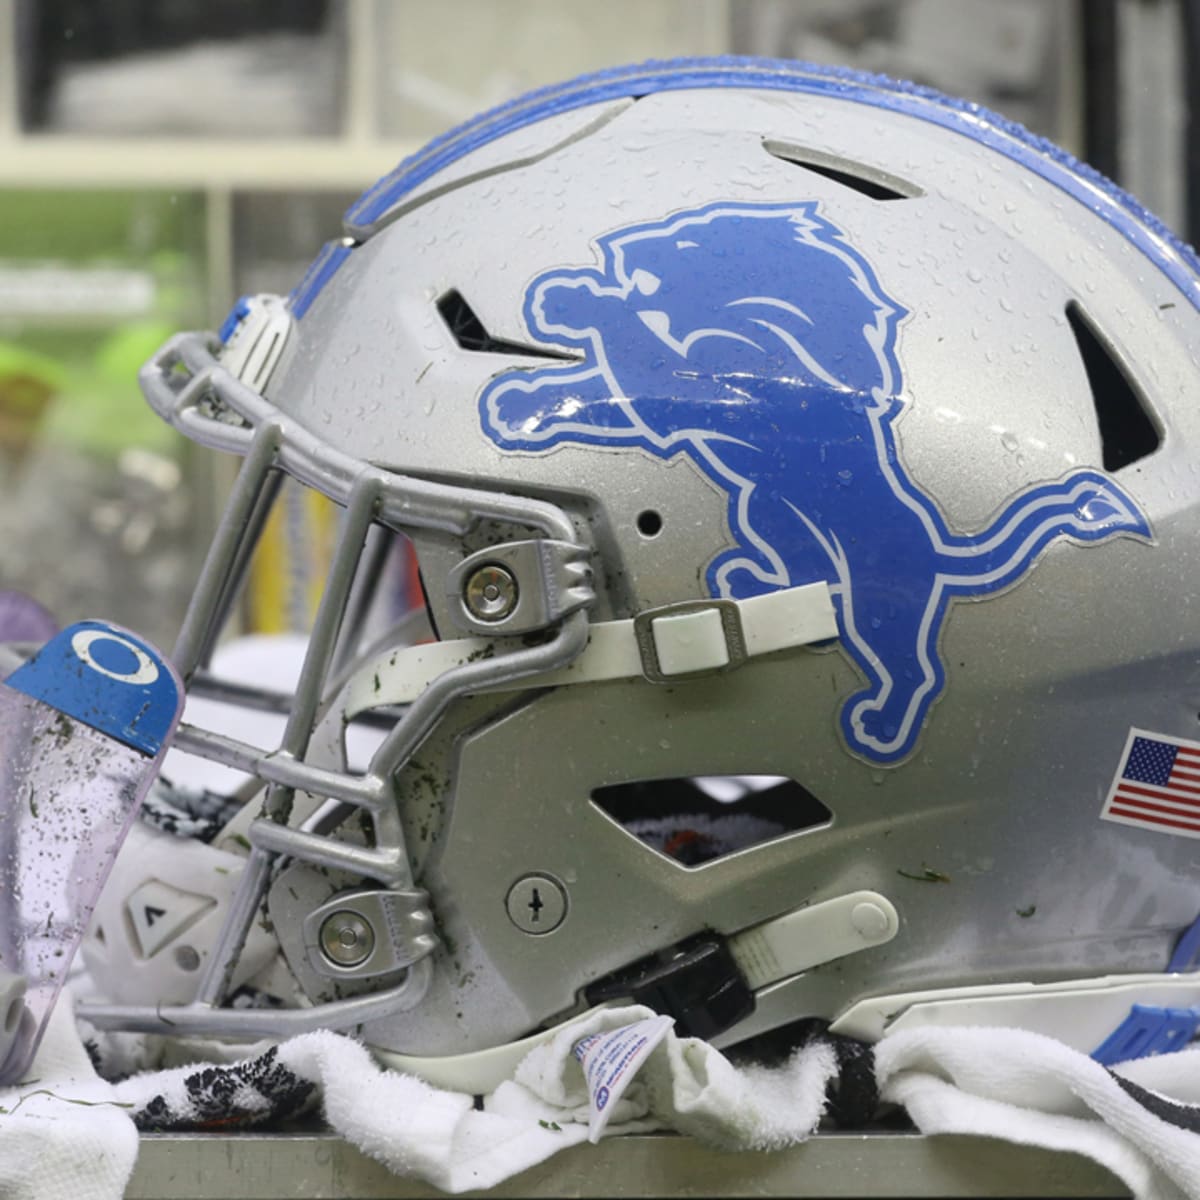 Detroit Lions logo created by fan goes viral online - Sports